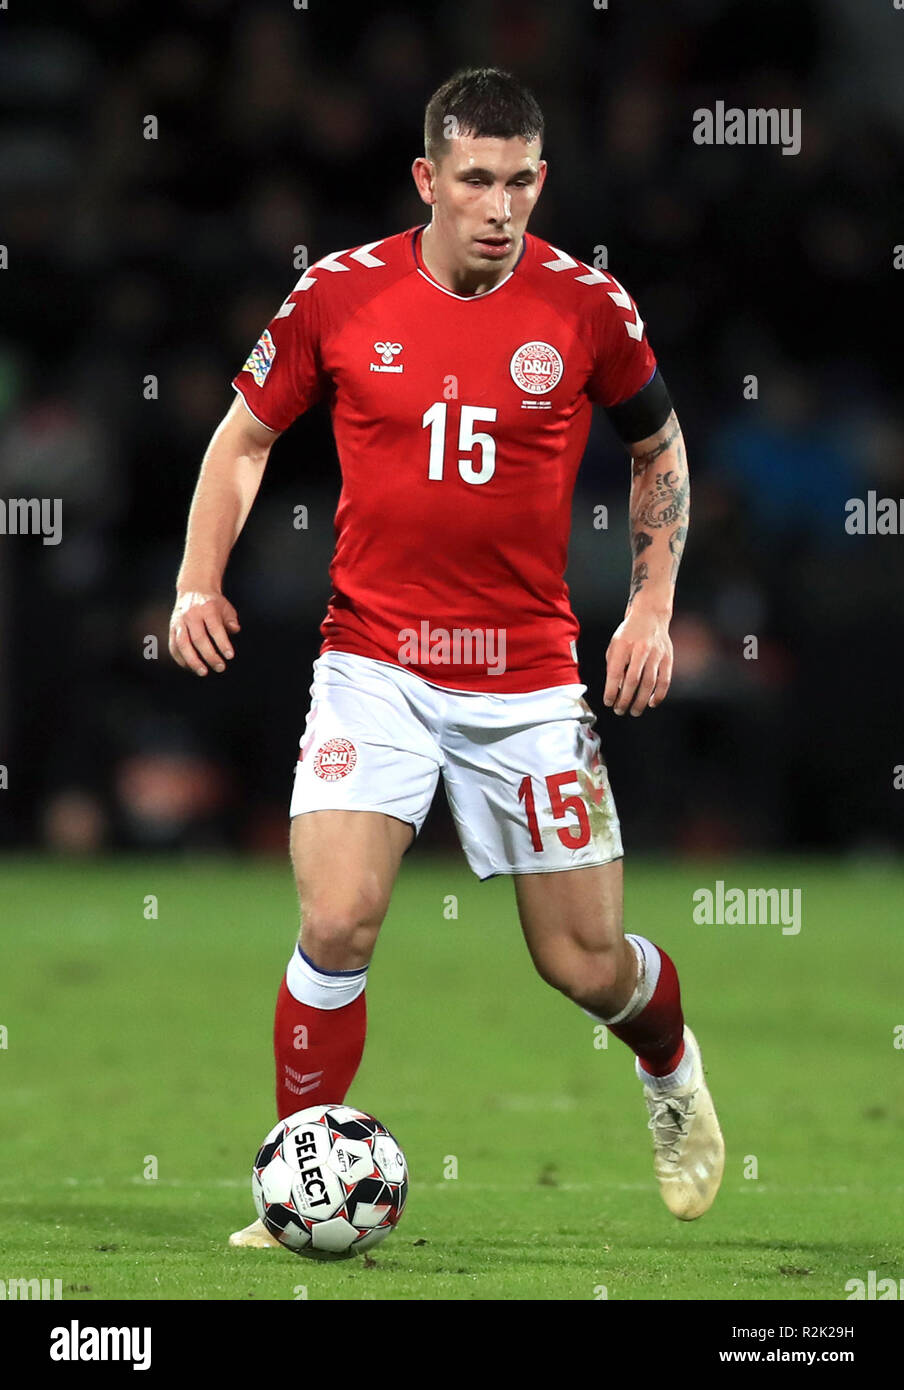 Denmark's Pierre-Emile Hojbjerg during the UEFA Nations League, Group B4 match at Ceres Park, Aarhus. PRESS ASSOCIATION Photo. Picture date: Monday November 19, 2018. See PA story SOCCER Denmark. Photo credit should read: Simon Cooper/PA Wire. Stock Photo